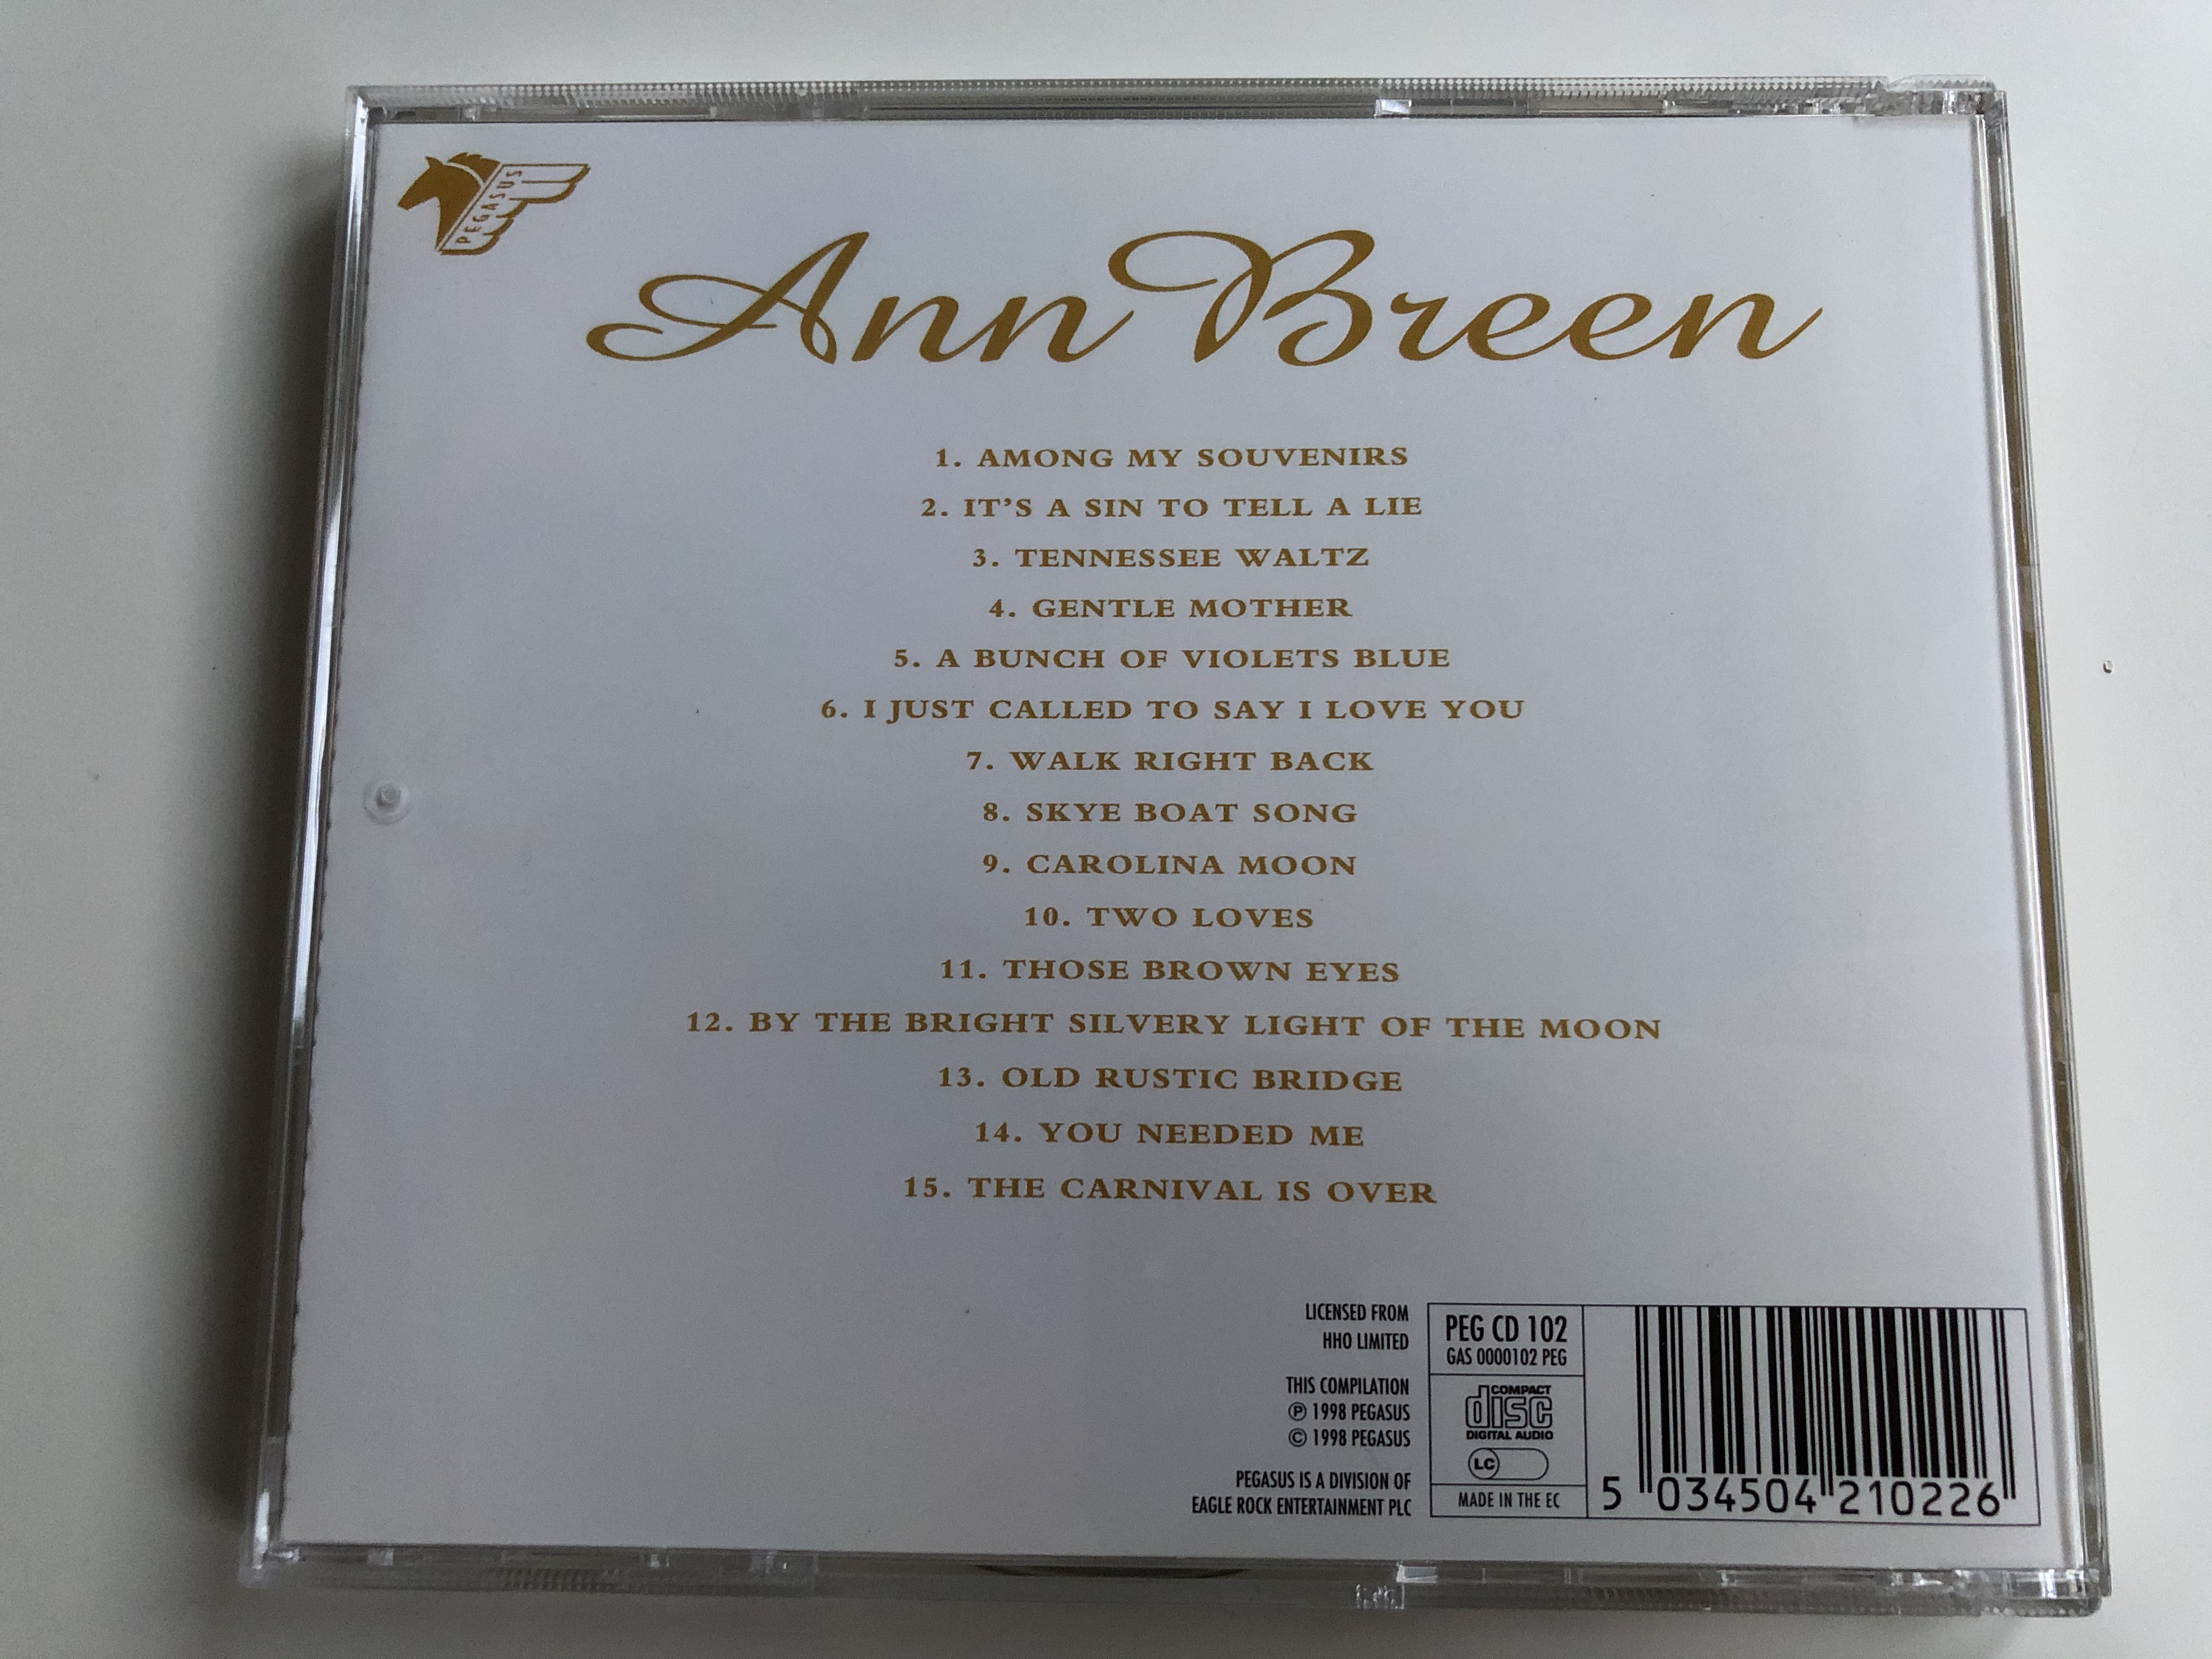 ann-breen-irish-favourites-including-a-bunch-of-violets-blue-skye-boat-song-old-rustic-bridge-among-my-souvenirs-two-loves-pegasus-audio-cd-1998-peg-cd-102-5-.jpg